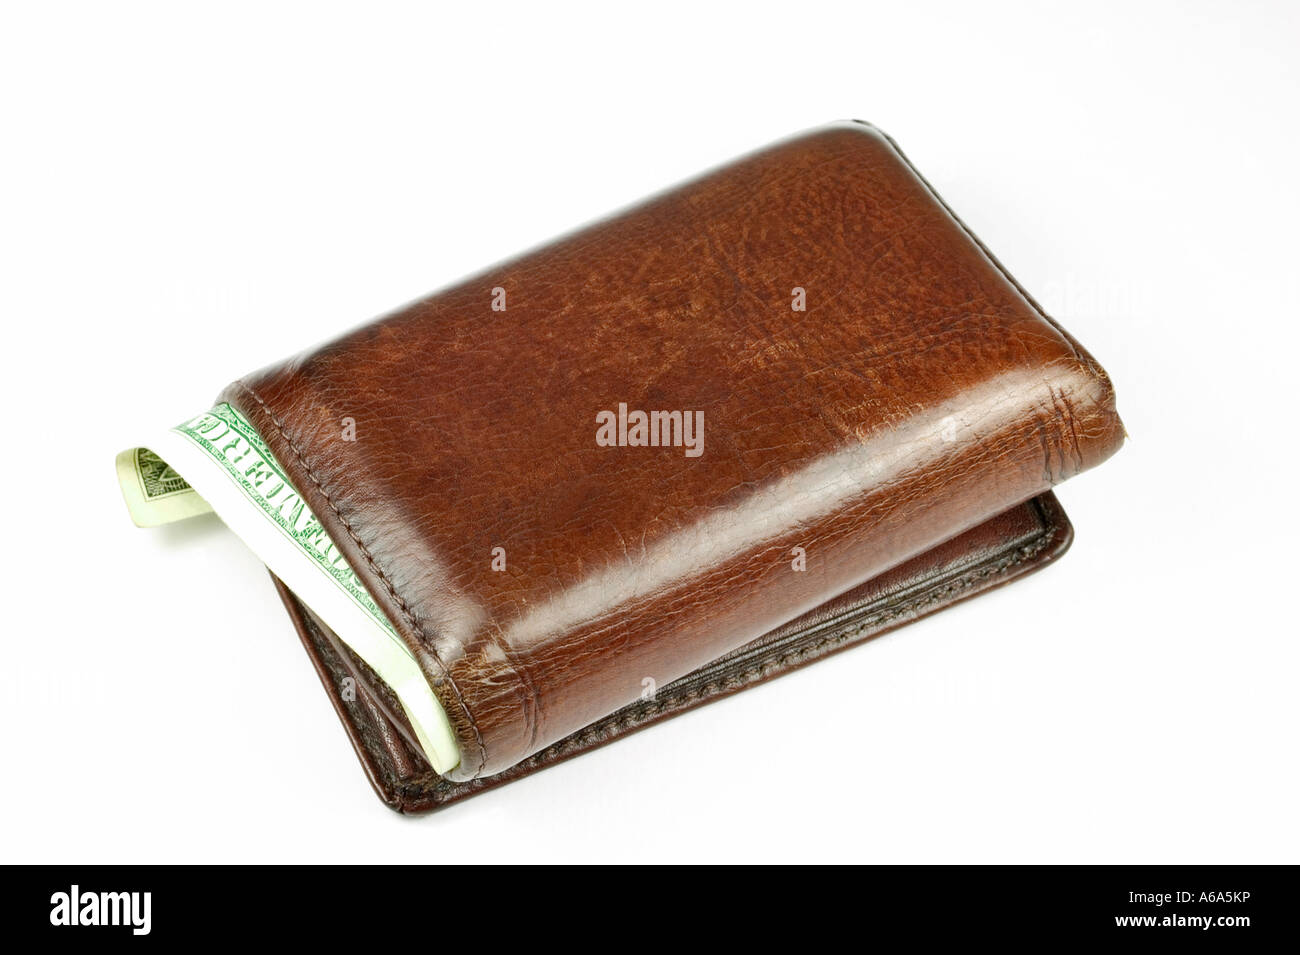 Old brown leather wallet with a dollar bill sticking out isolated on white Stock Photo